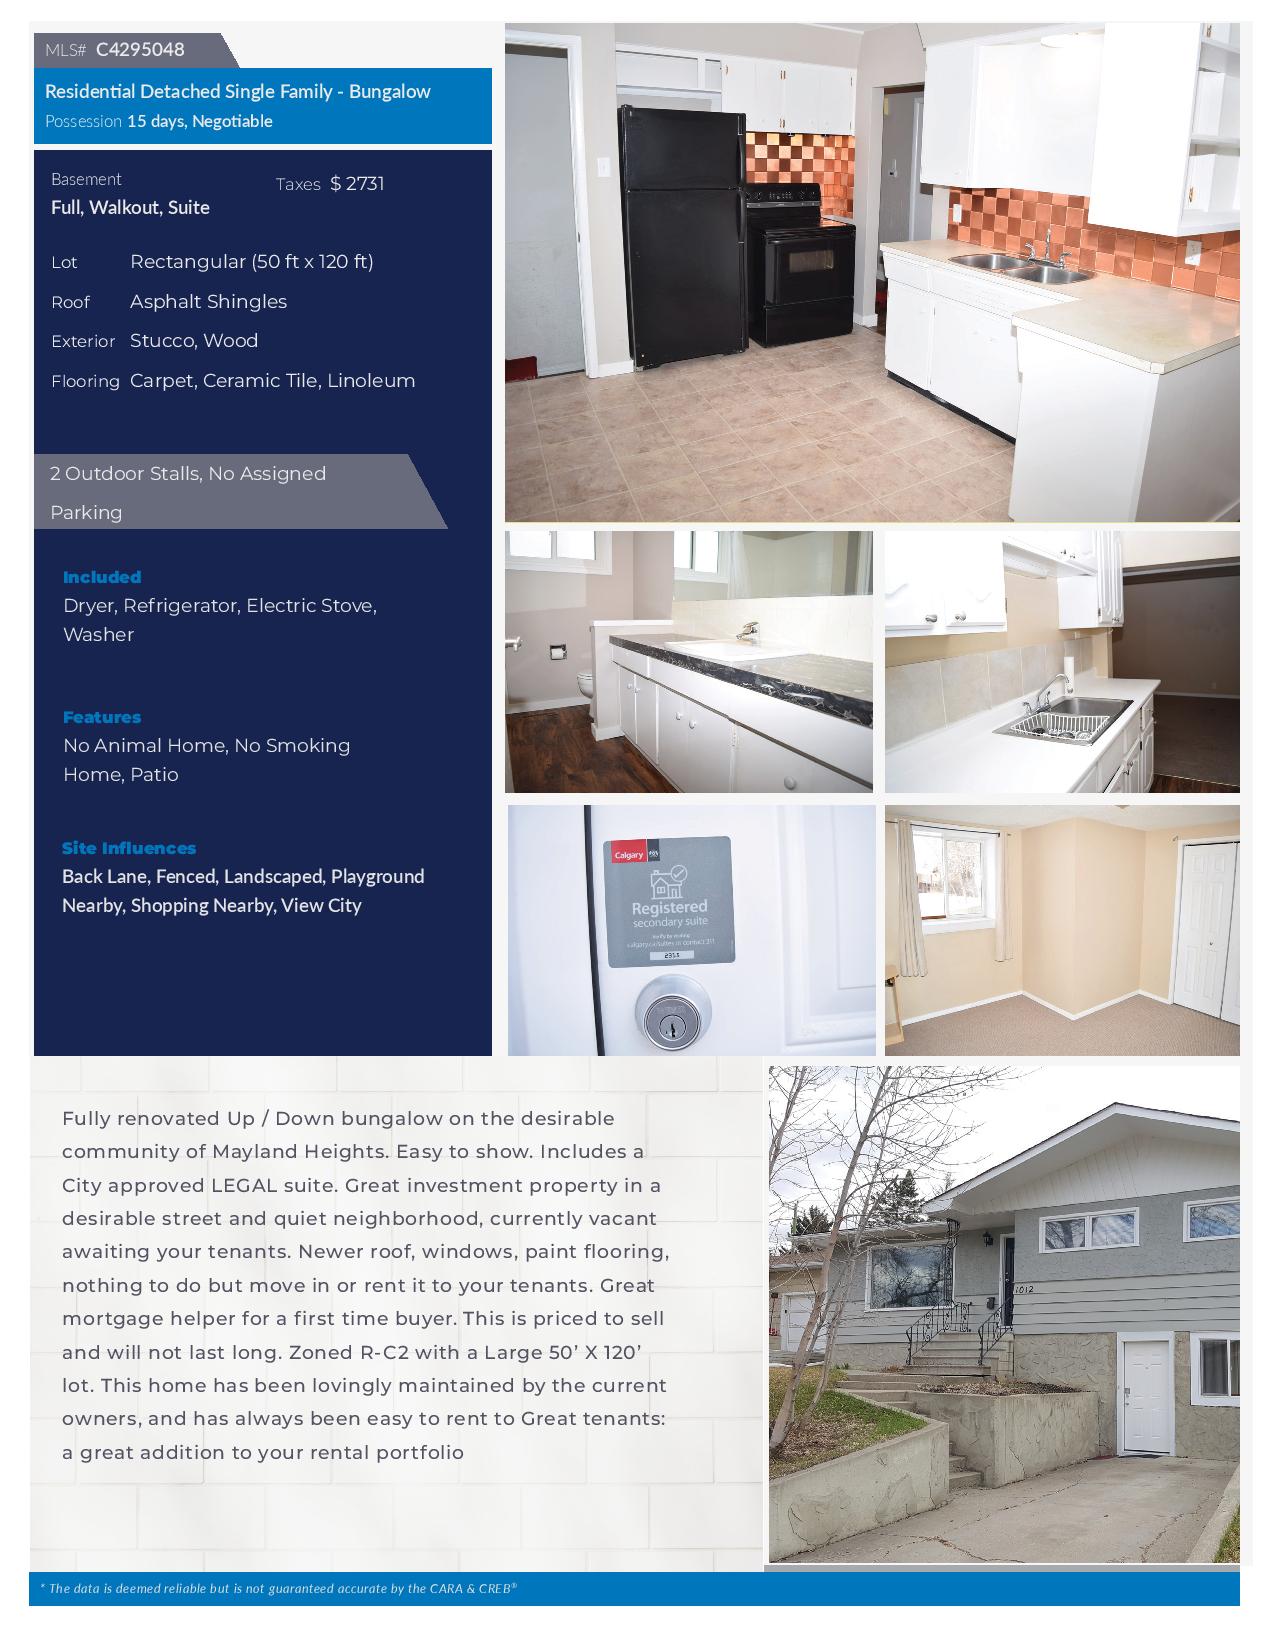 1012 16A STREET NE color CIr Feature Sheet page 2 | Non-Legal Secondary Suites in Calgary